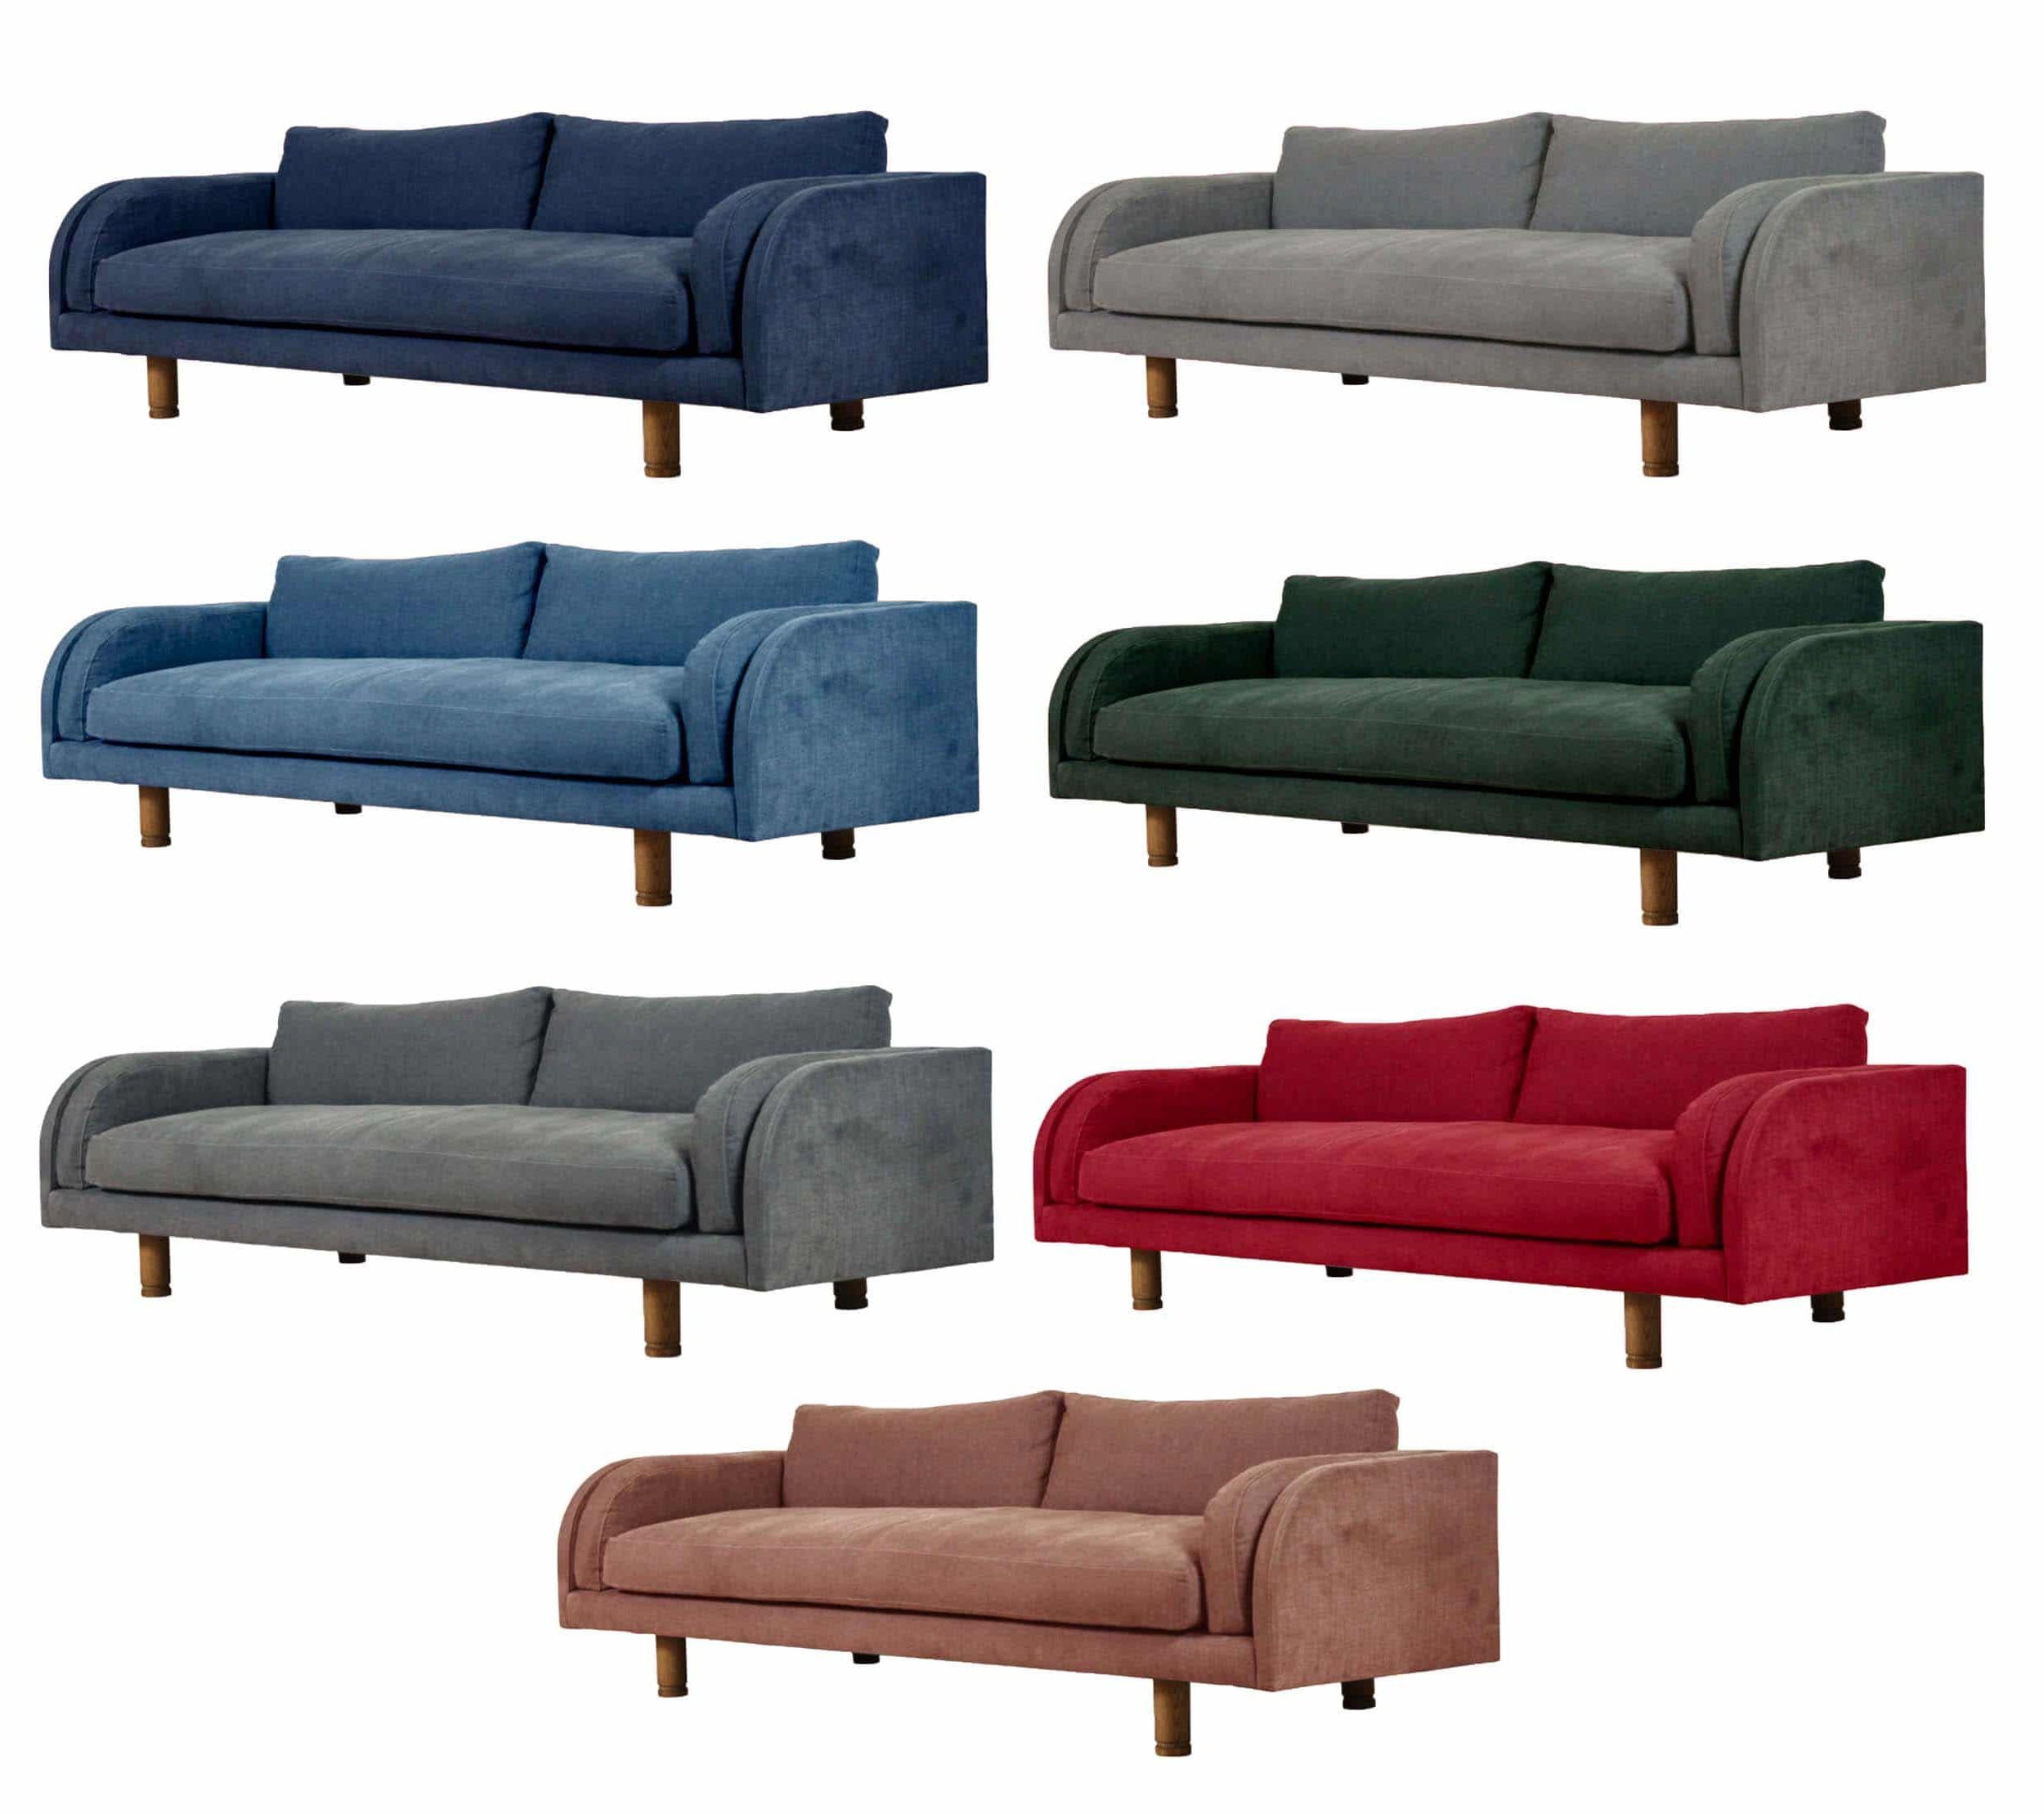 Latest Sofas In Multiple Colors Inside Our Living Room Update: What’s Next? (moodboards + Sofa Debates (Photo 11 of 15)